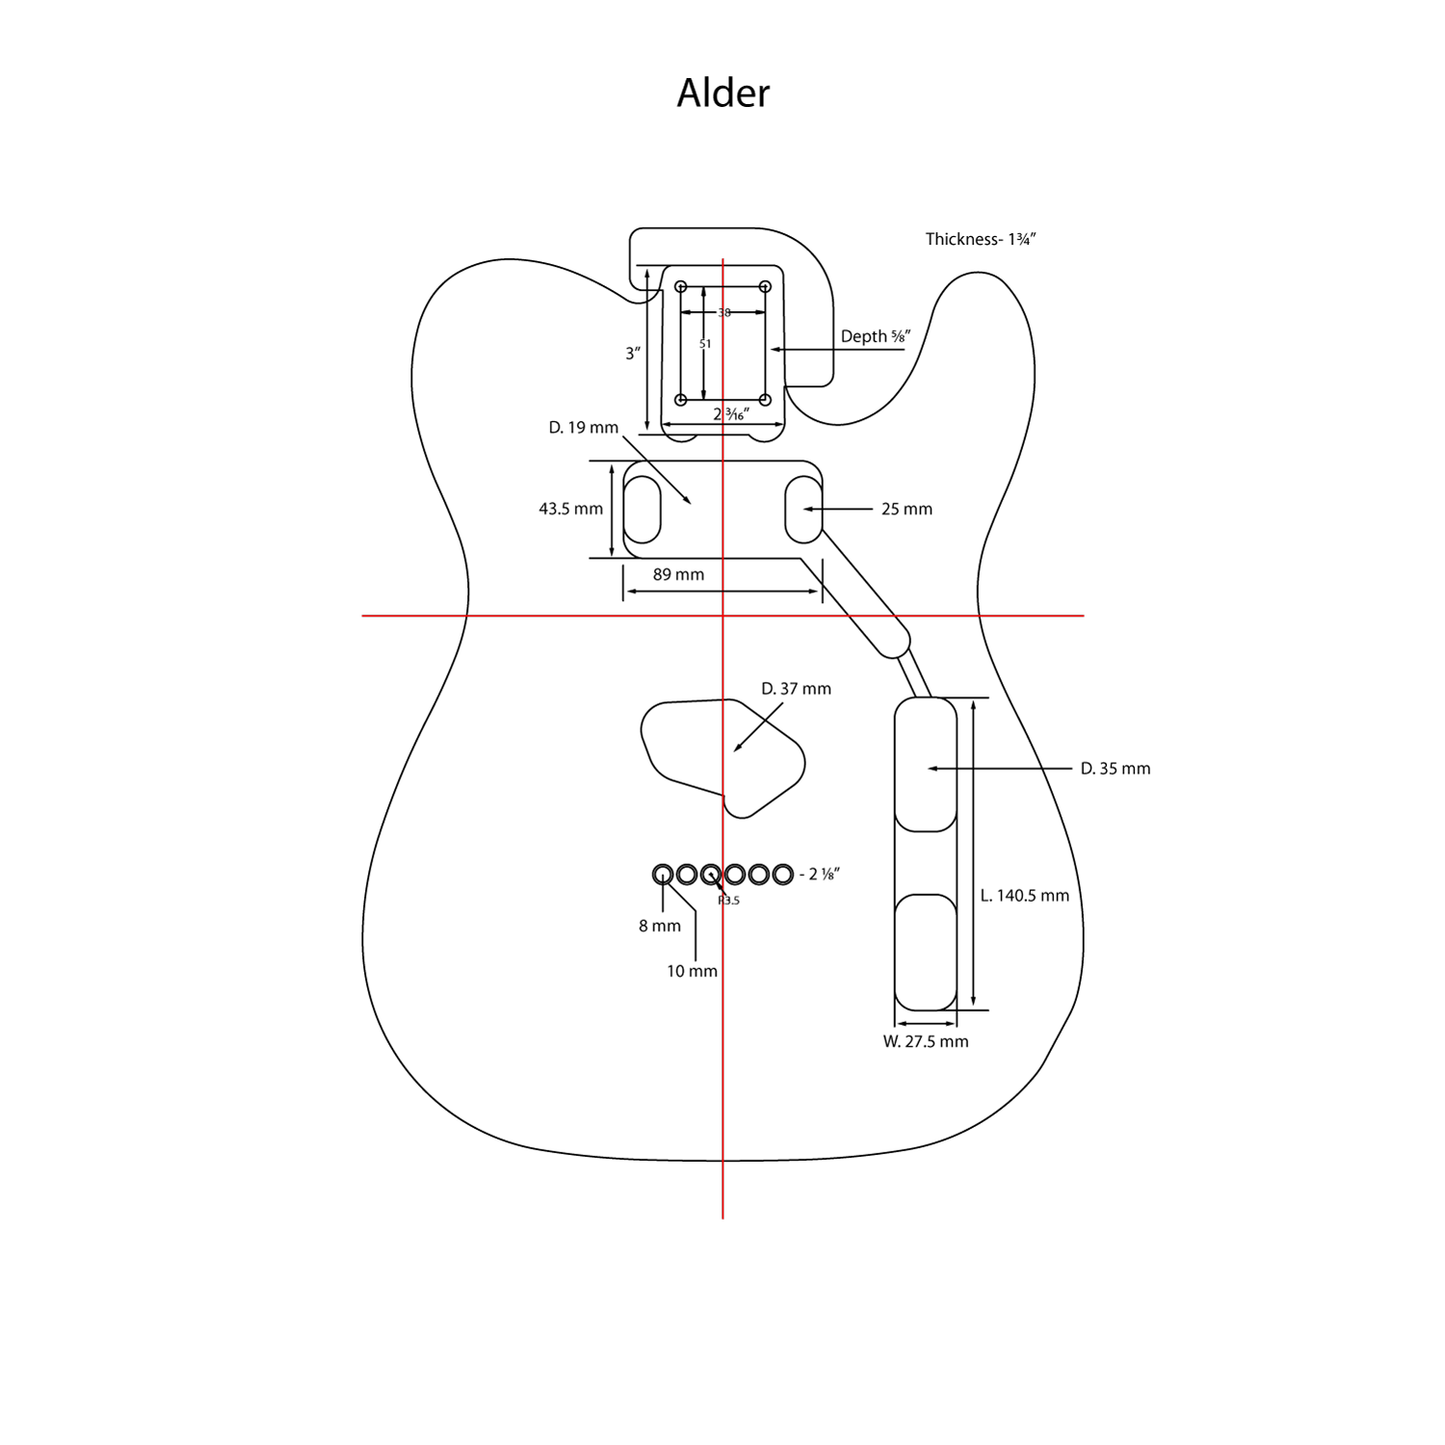 AE Guitars® T-Style Alder Replacement Guitar Body Fire Engine Red